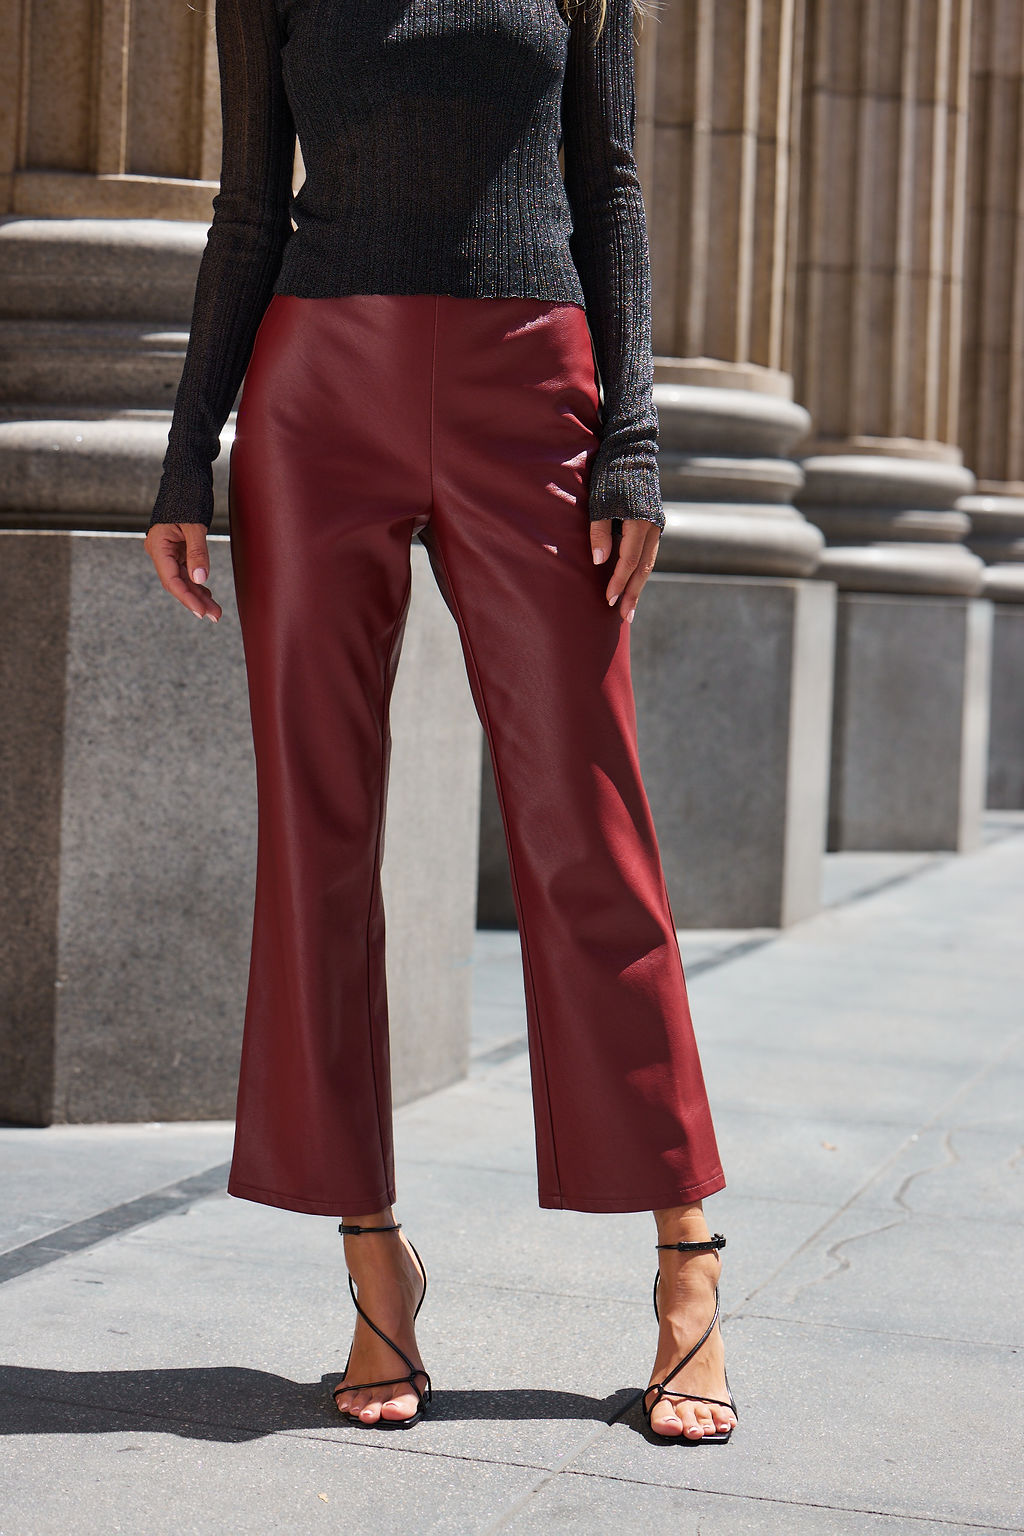 Melody Burgundy Skinny Leather Pants Pu Faux Leather Trousers Womens Dark  Red Leather Pants Womens Butt Lift Vintage Clothes 1020 From Bailixi04,  $69.33 | DHgate.Com